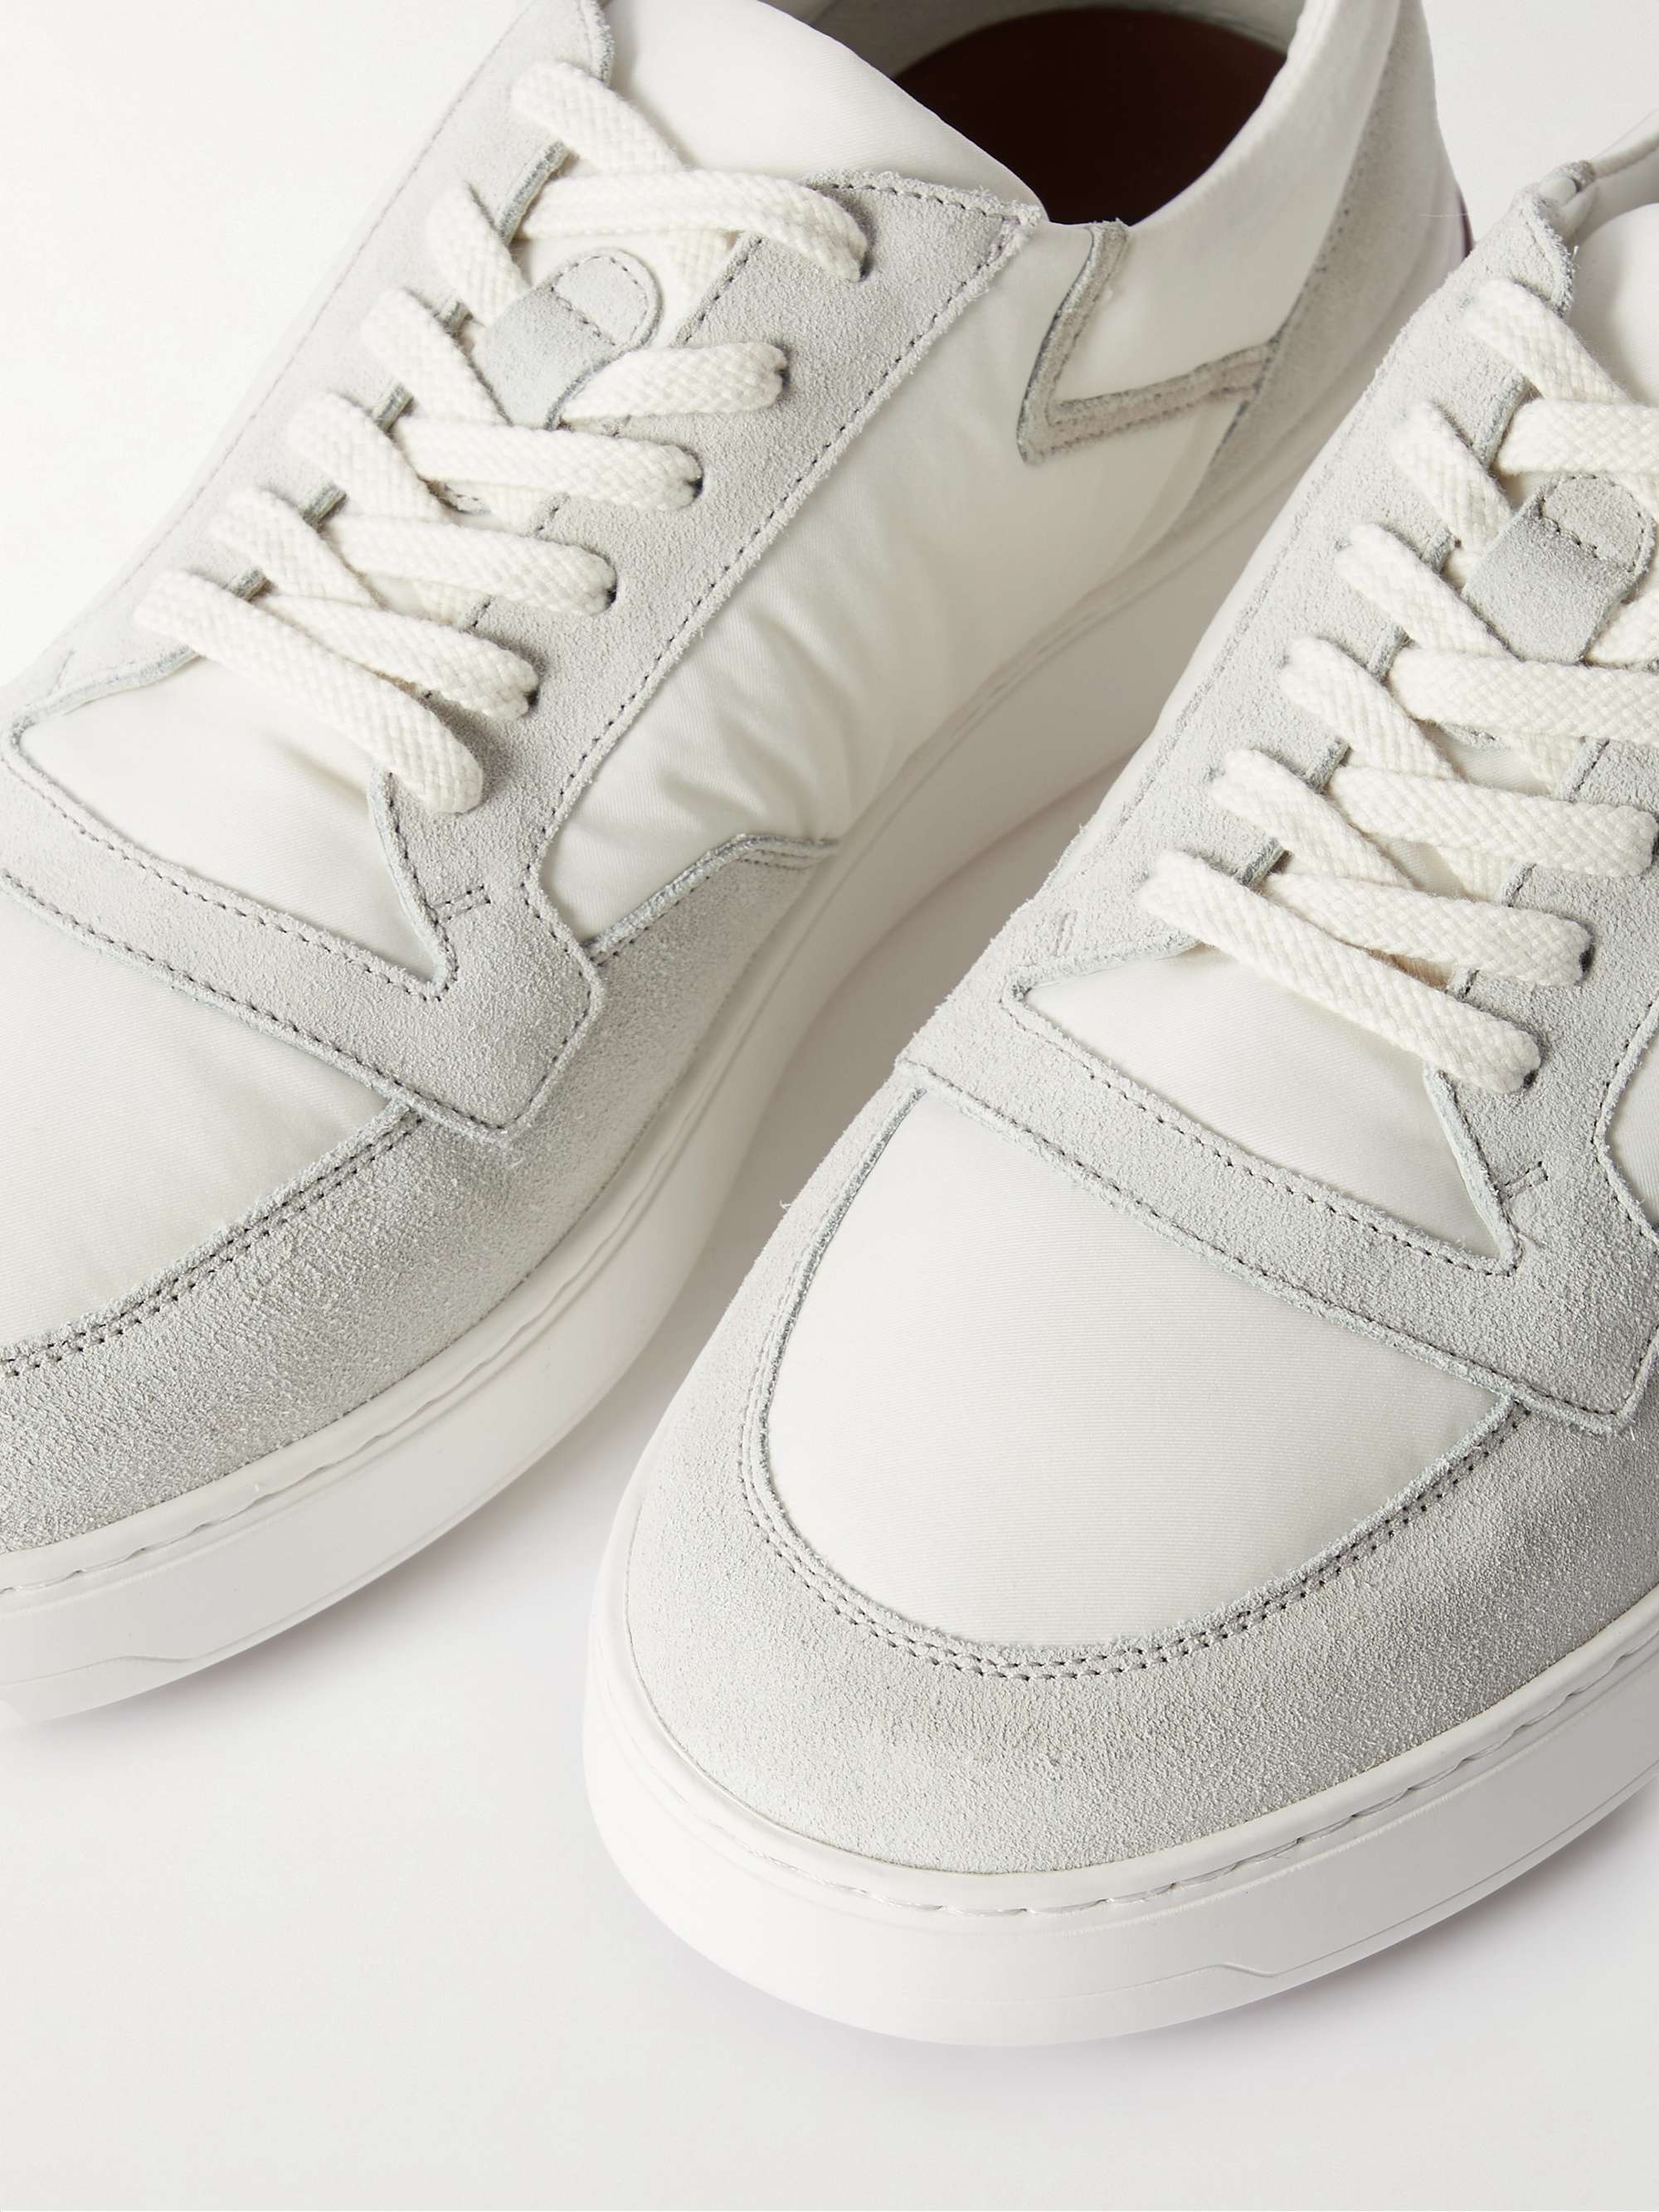 LORO PIANA Newport Suede-Trimmed Shell Sneakers